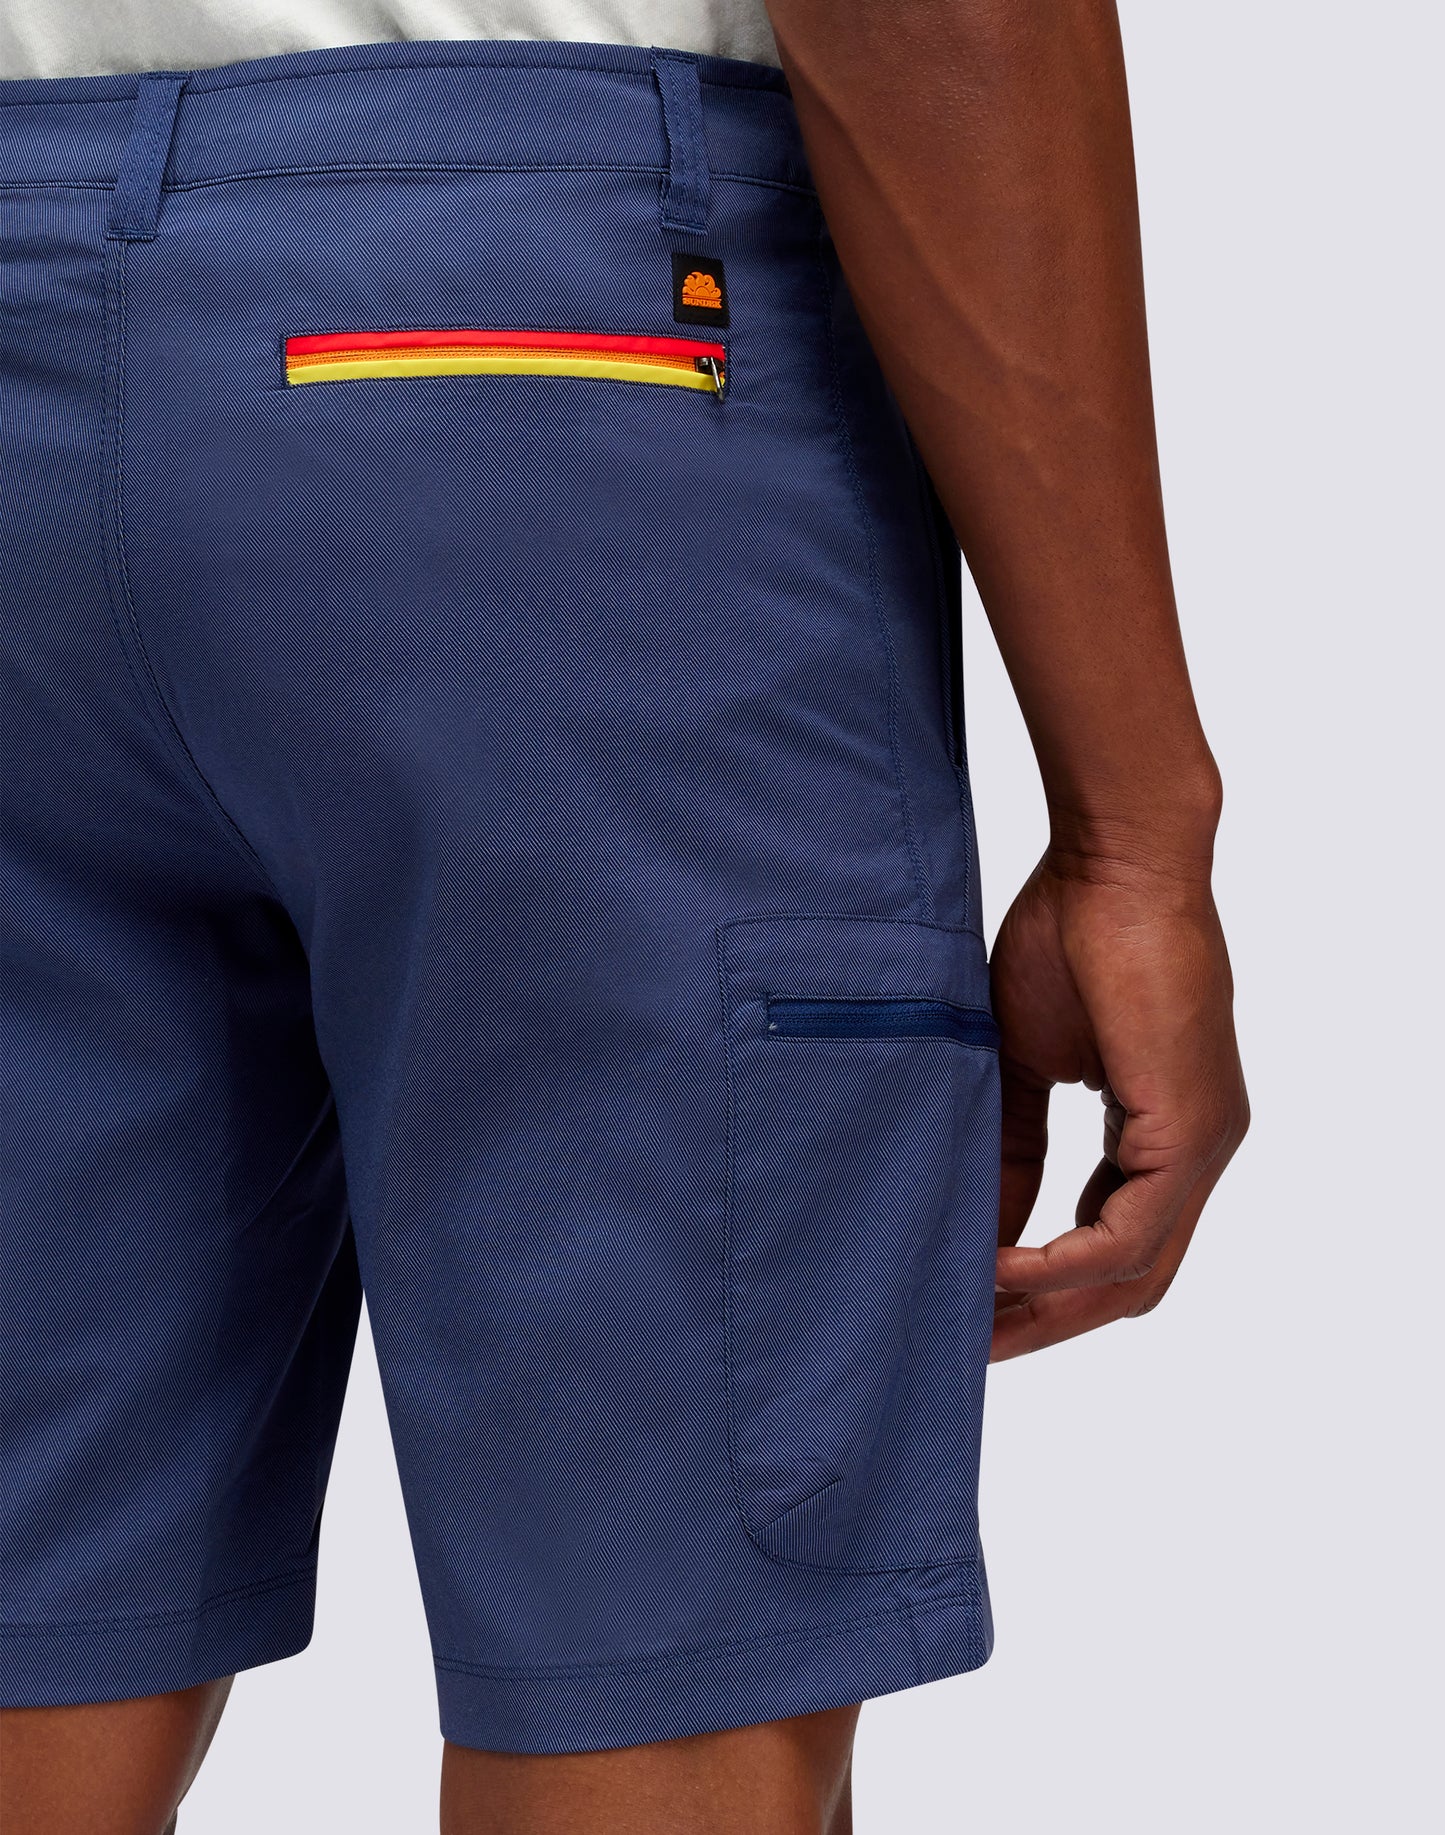 SHORTS CARGO IN TESSUTO QUICK DRY